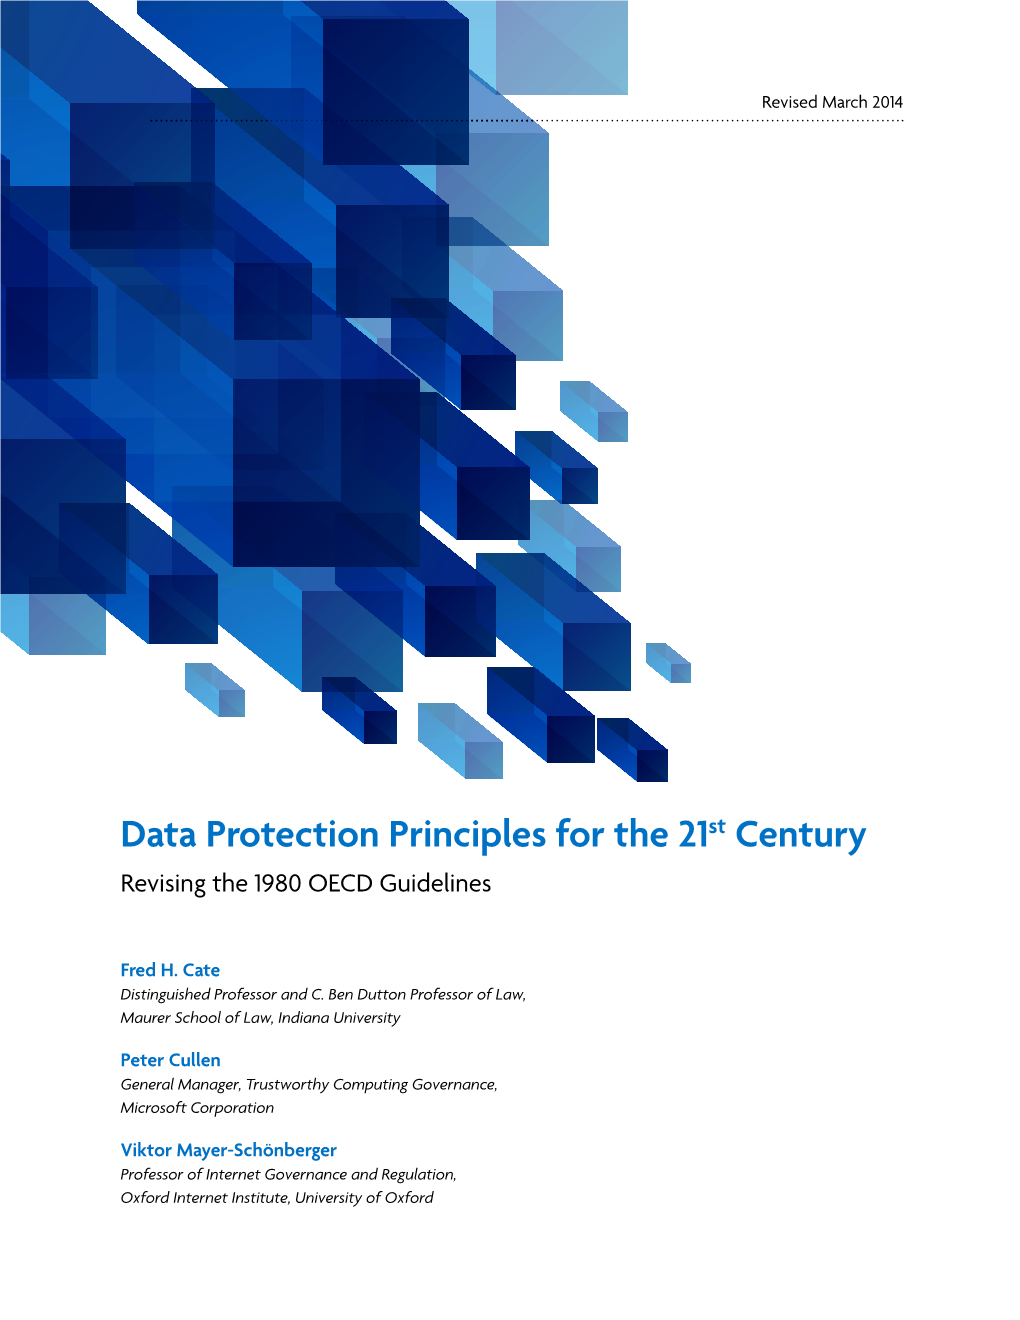 Data Protection Principles for the 21St Century: Revising the 1980